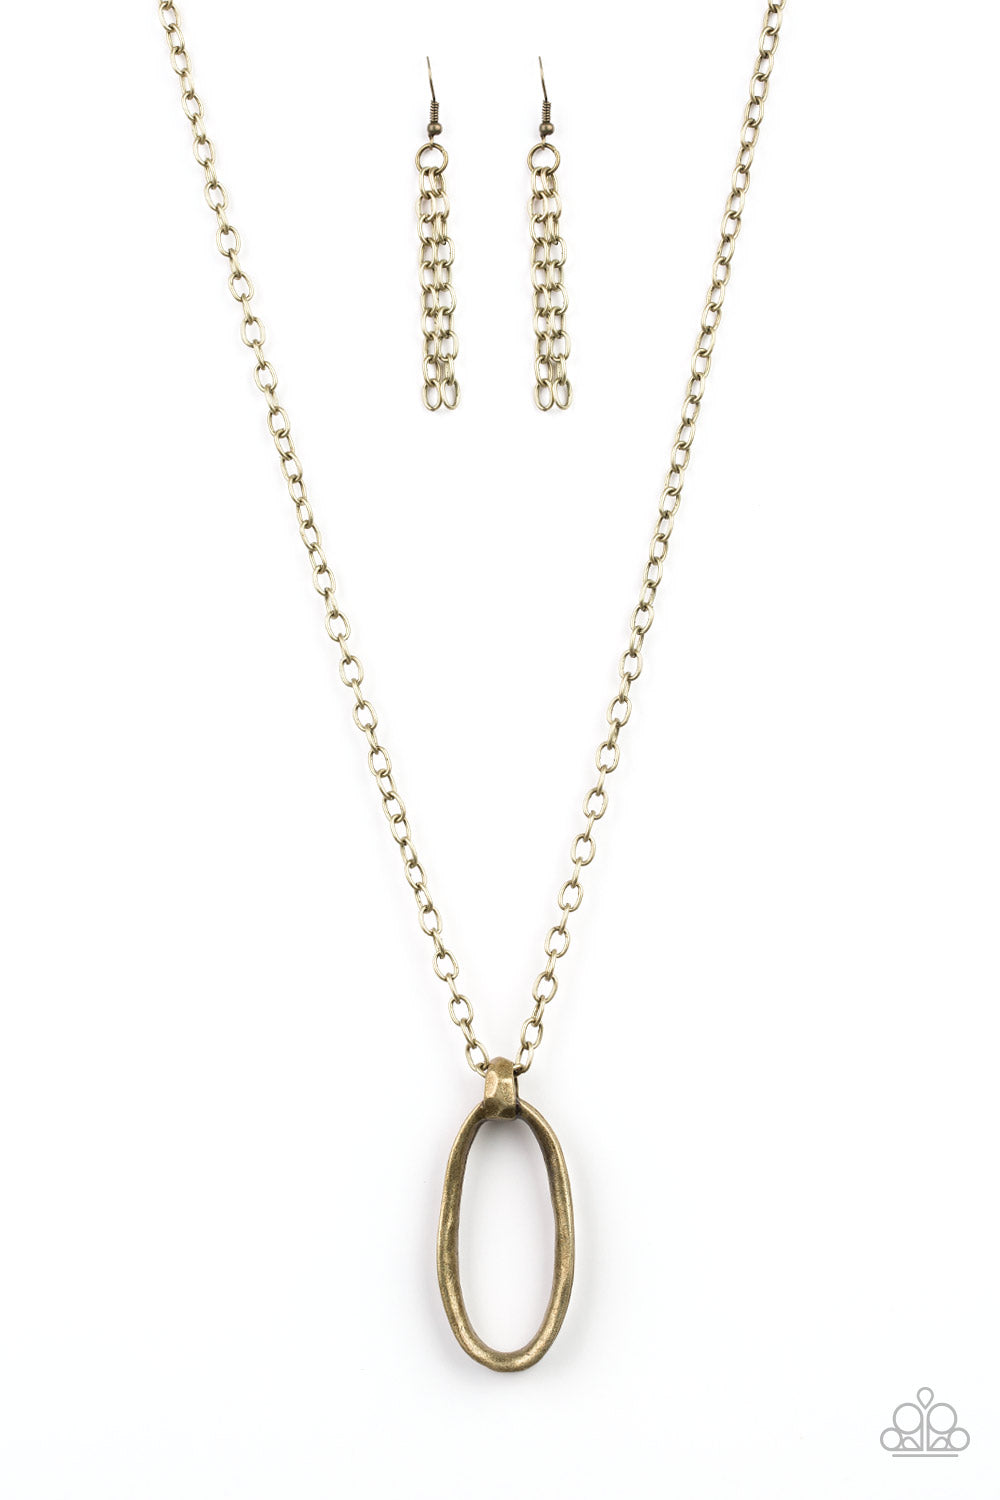 Paparazzi Necklaces - Grit Girl - Brass